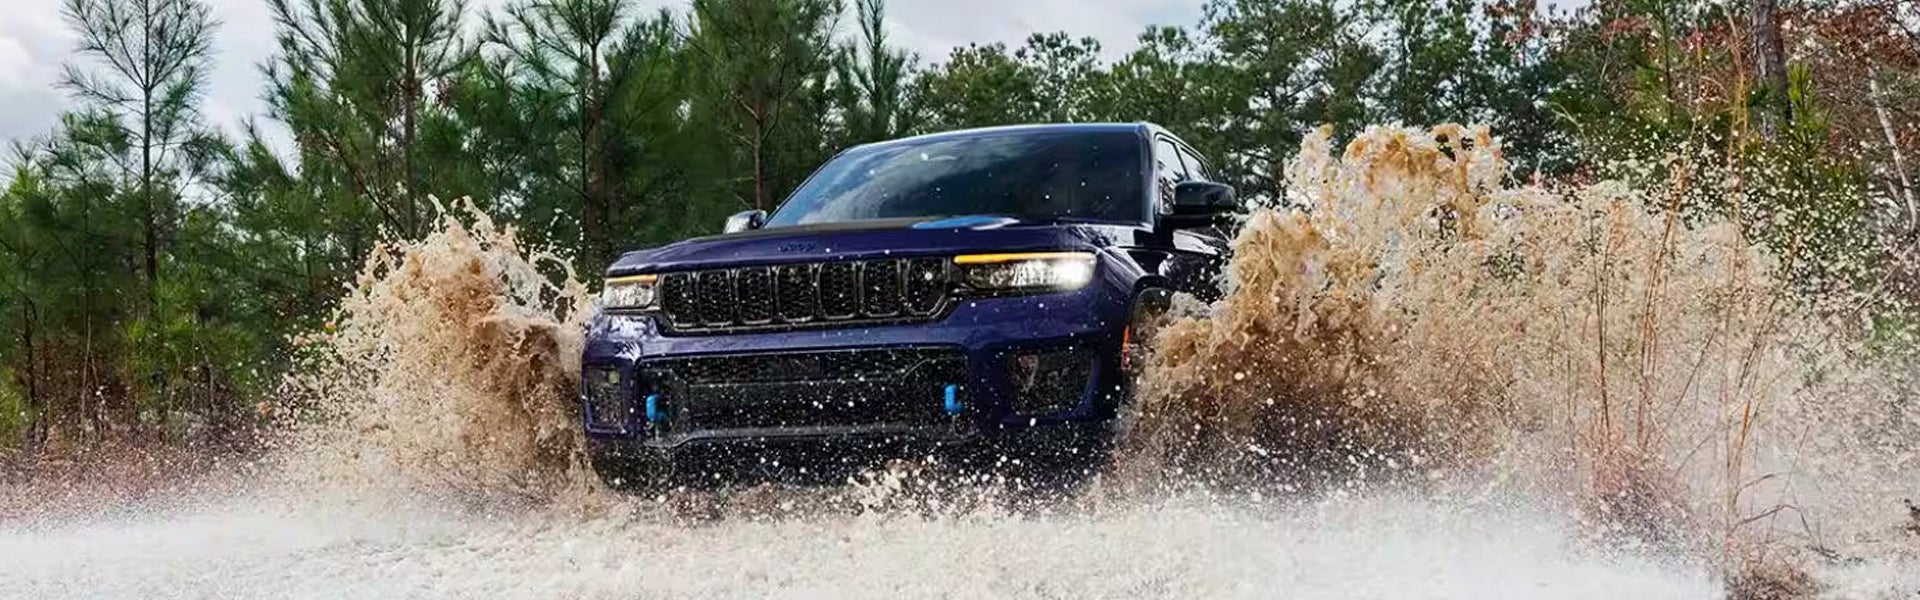 Jeep Grand Cherokee Interior technology Features